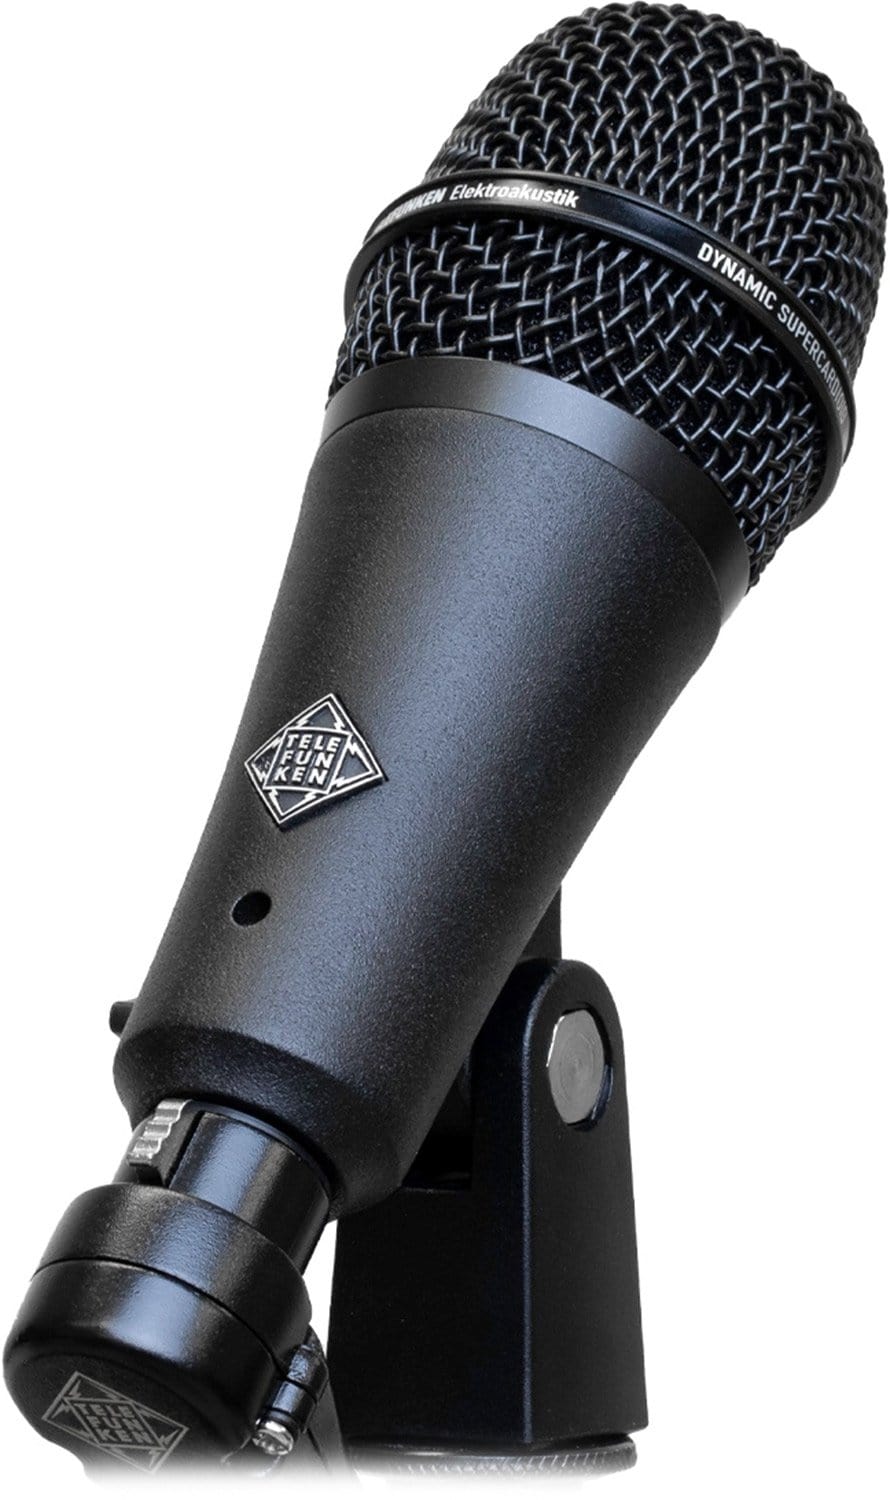 Telefunken M80-SH Microphone Dynamic Supercardioid - PSSL ProSound and Stage Lighting